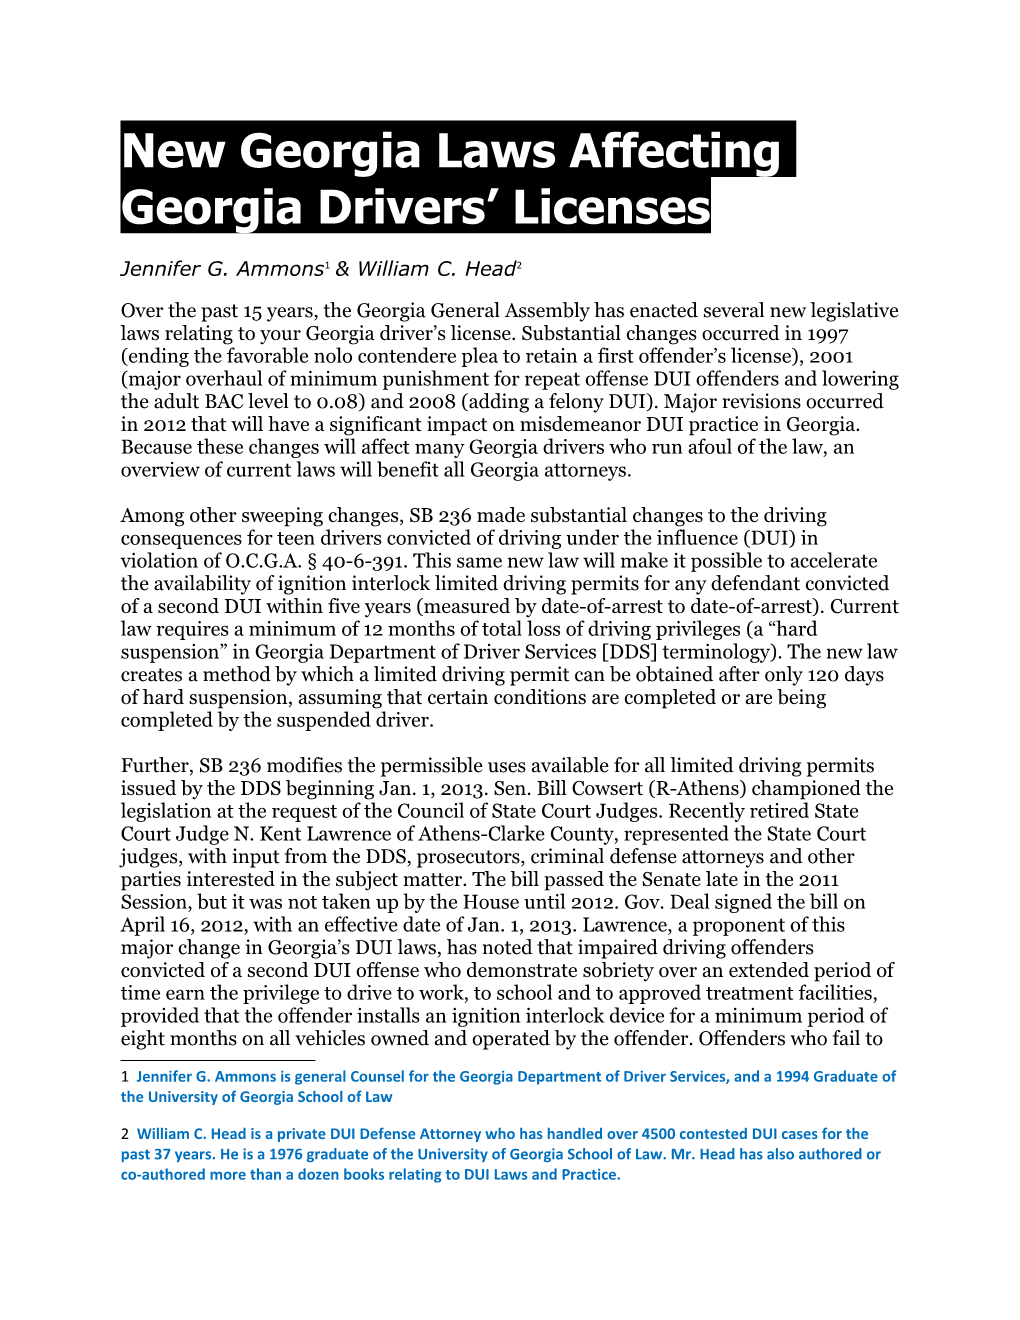 1 Jennifer G. Ammons Is General Counsel for the Georgia Department of Driver Services